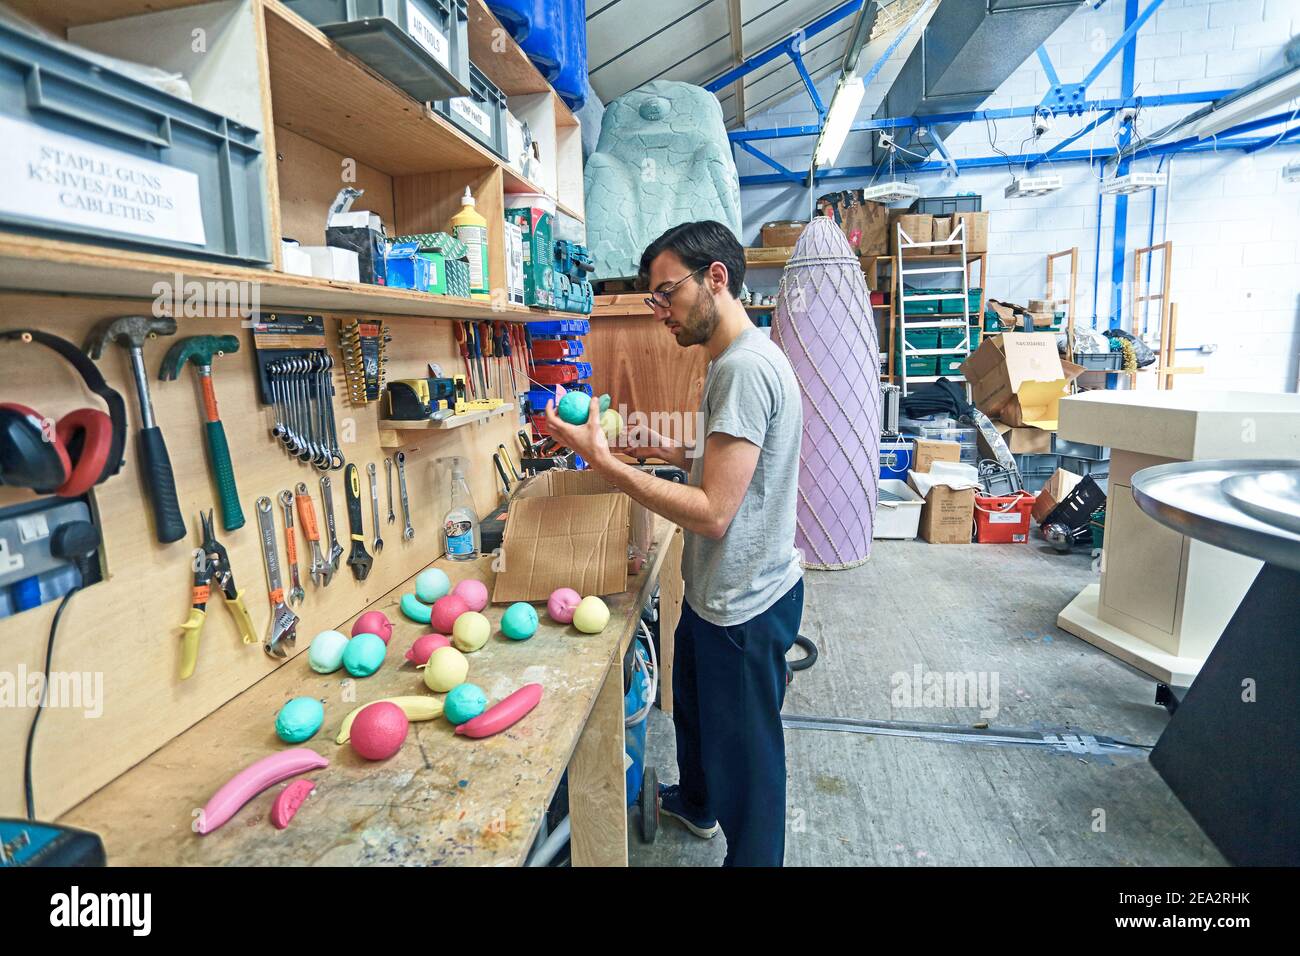 GREAT BRITAIN,London , Bombas and Paar , Set designer working in Studio painting plastic fruits . Stock Photo